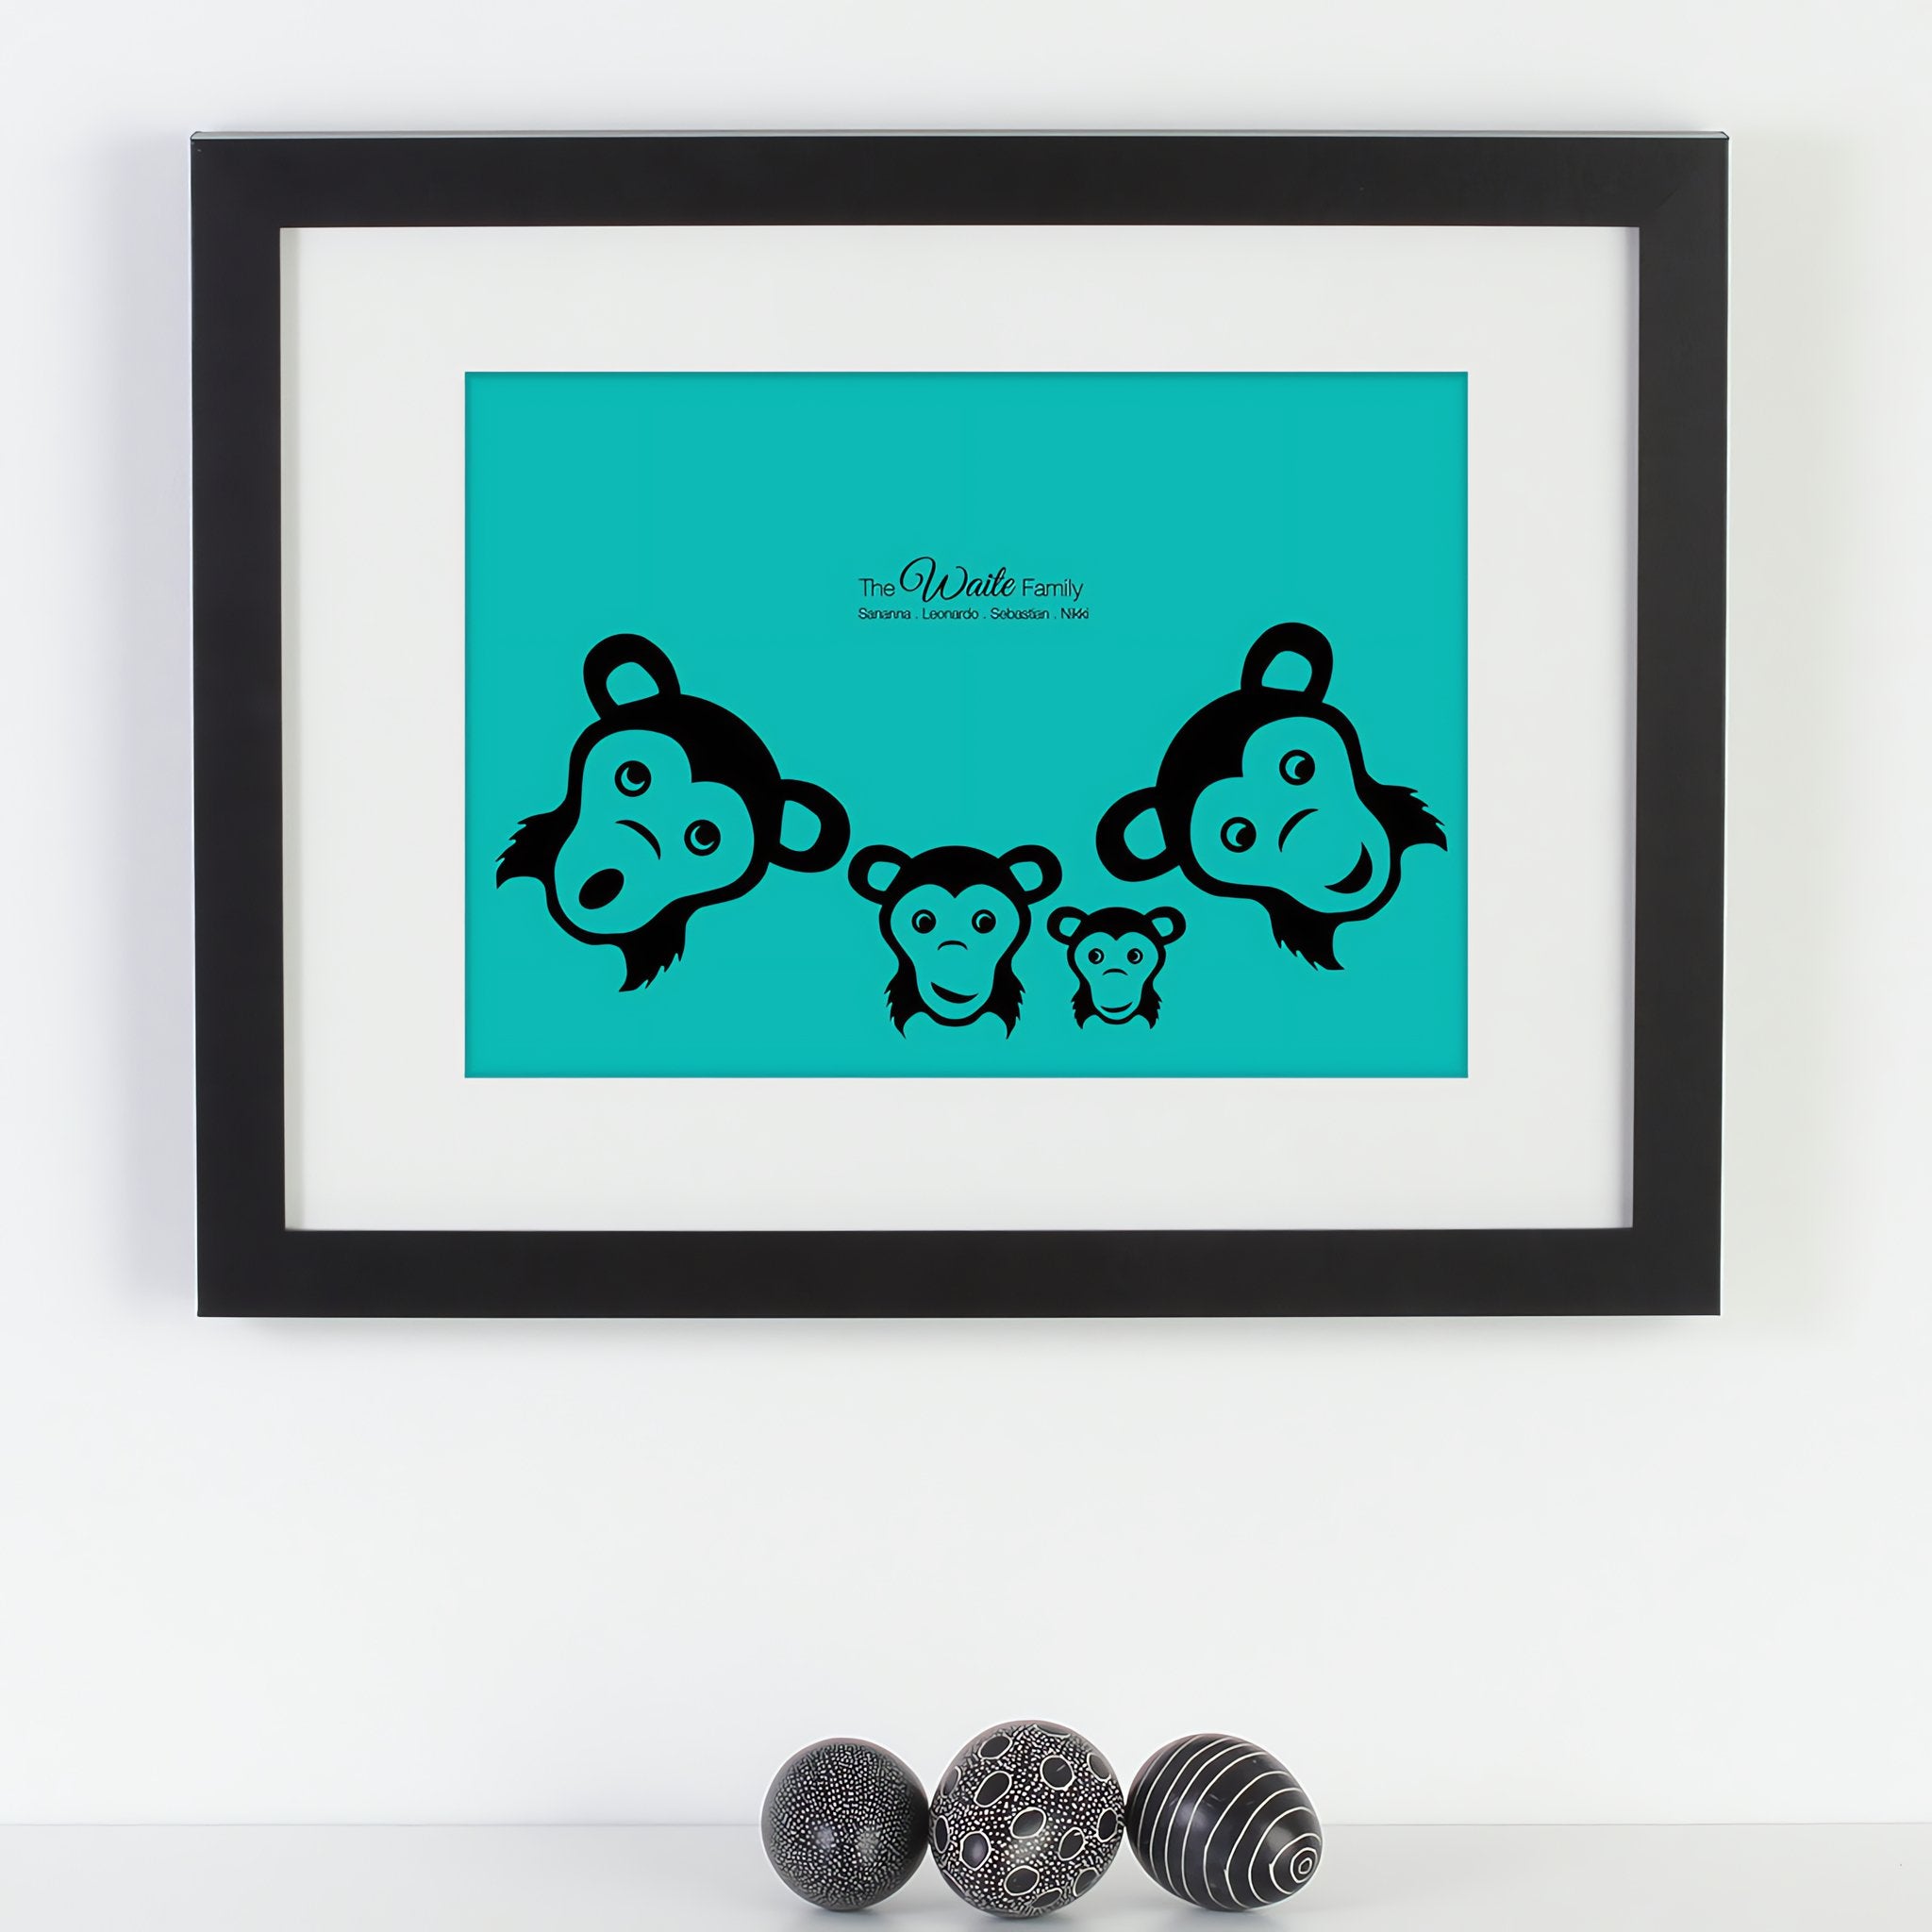 Personalized framed print of a family of monkies with names next to ornamental eggs.